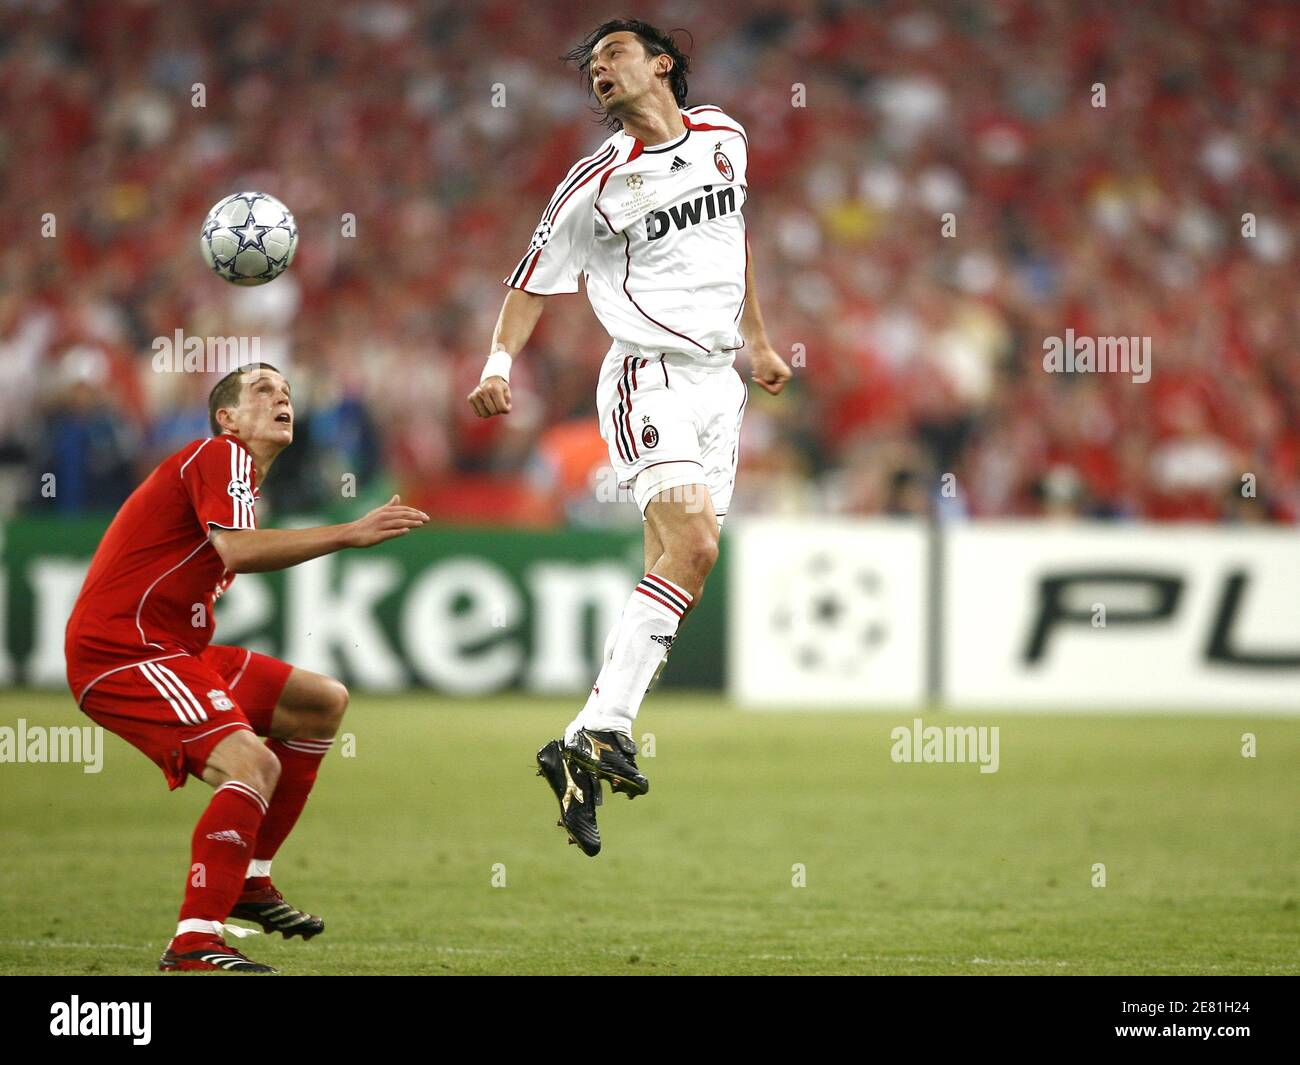 AC Milan's Felippo Inzaghi and Liverpool's Jamie Carragher battle for the ball during the UEFA Champions League Final, AC Milan v Liverpool at Olympic Stadium, in Athens, Greece, on May 23, 2007. AC Milan won 2-1. Photo by Christian Liewig/ABACAPRESS.COM Stock Photo